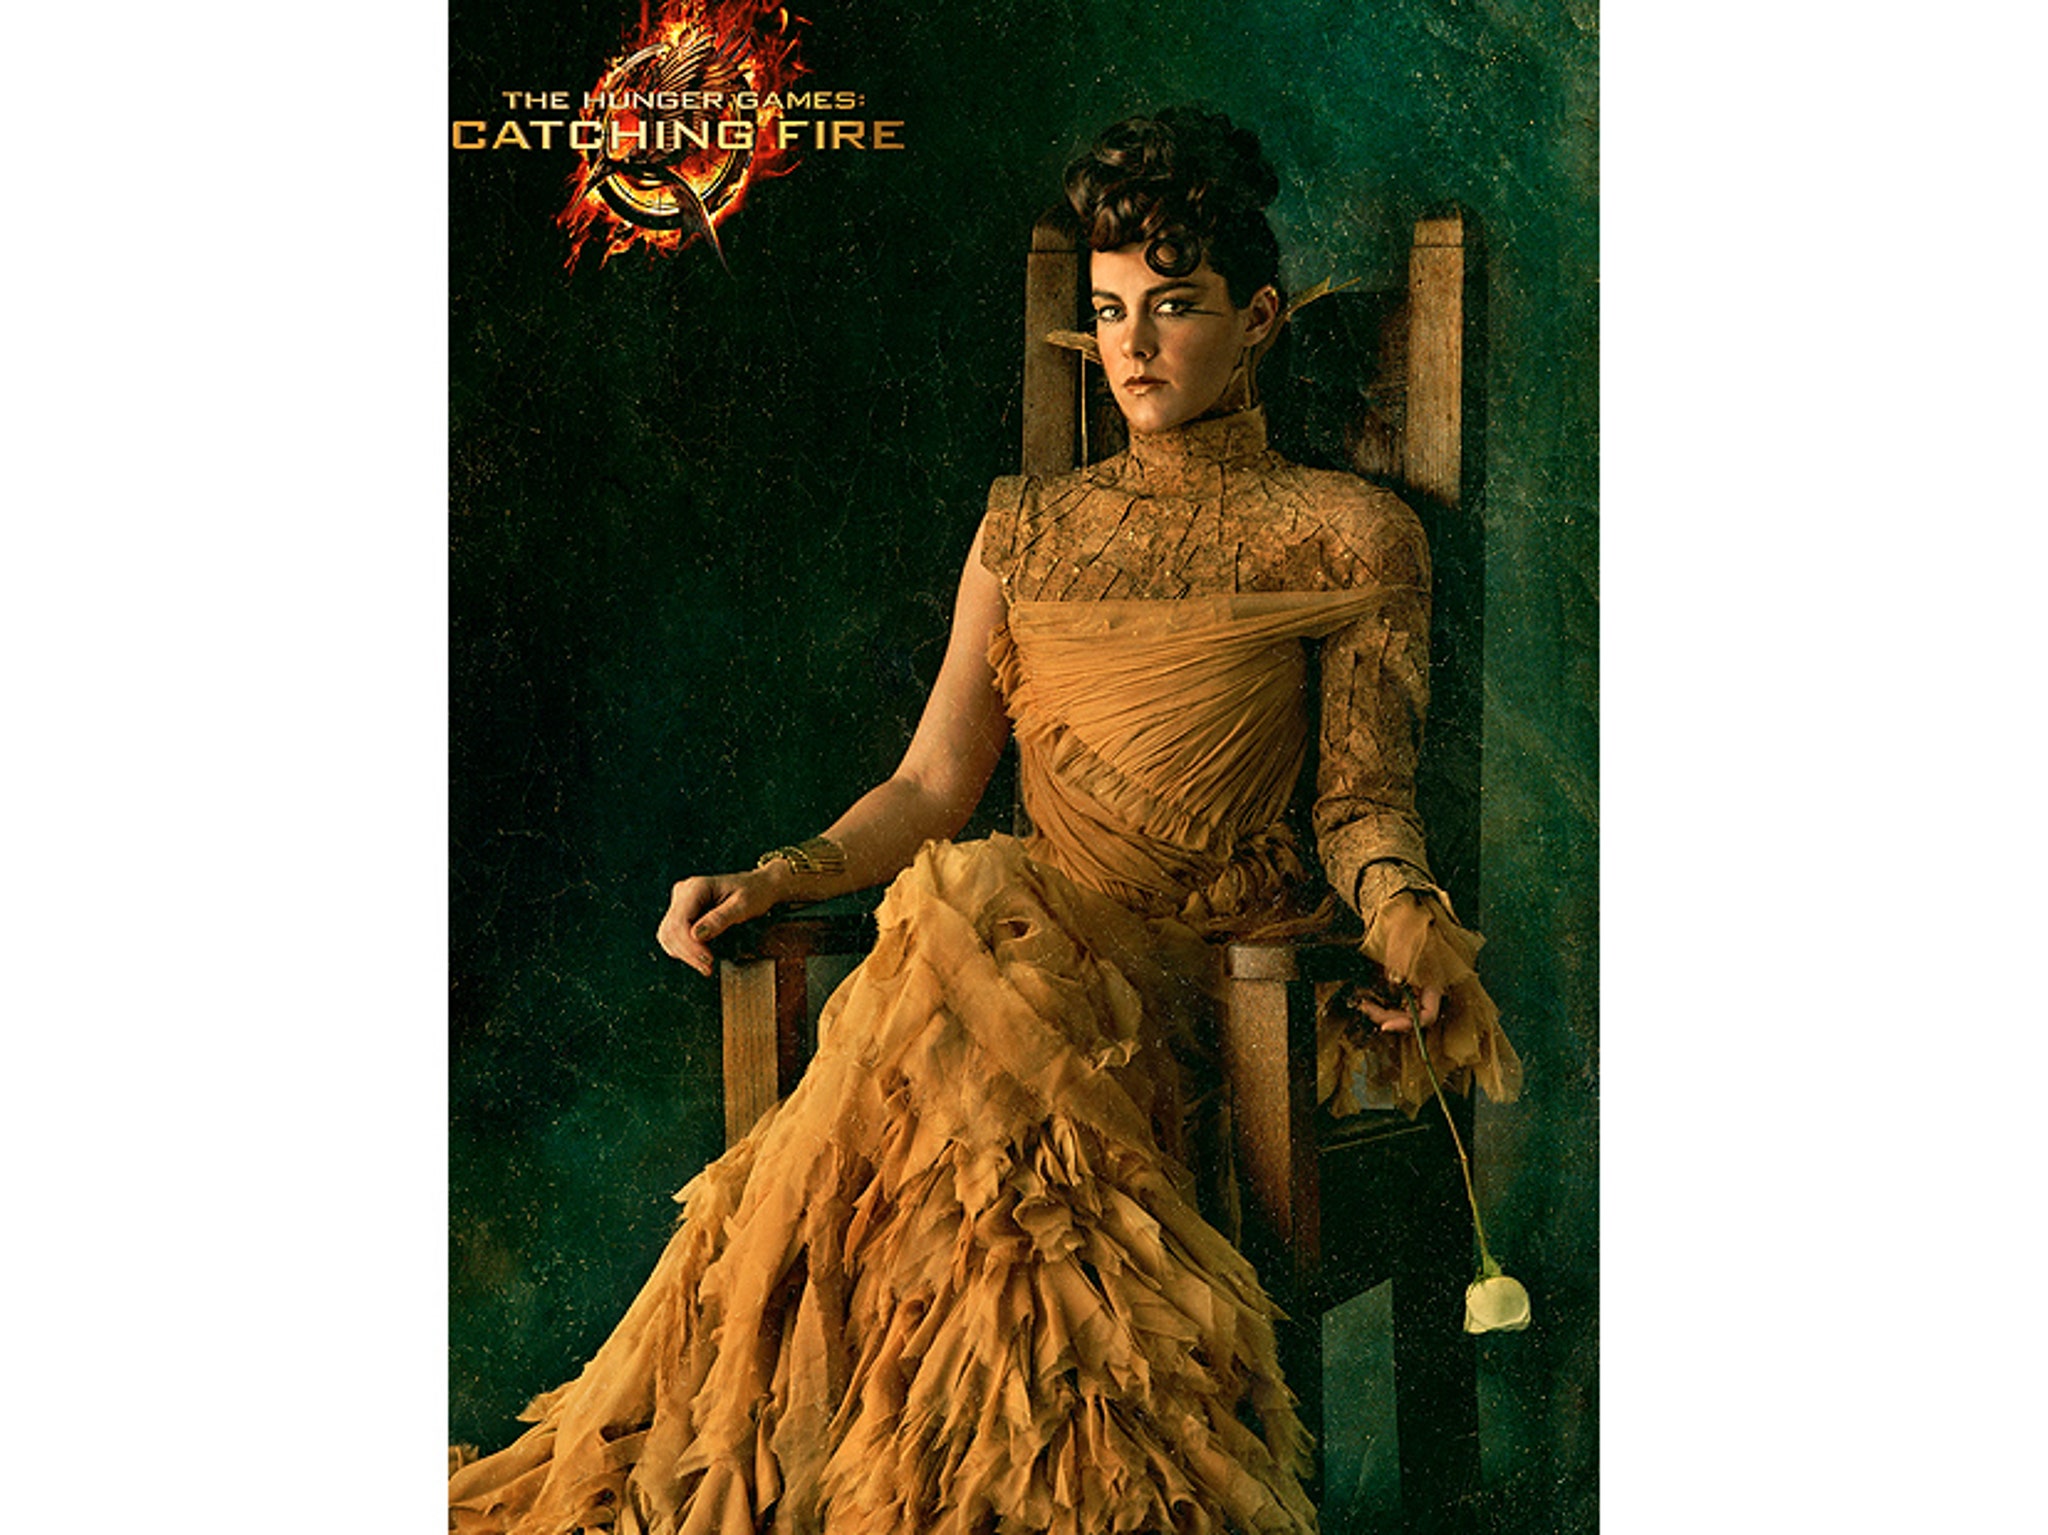 catching fire costumes